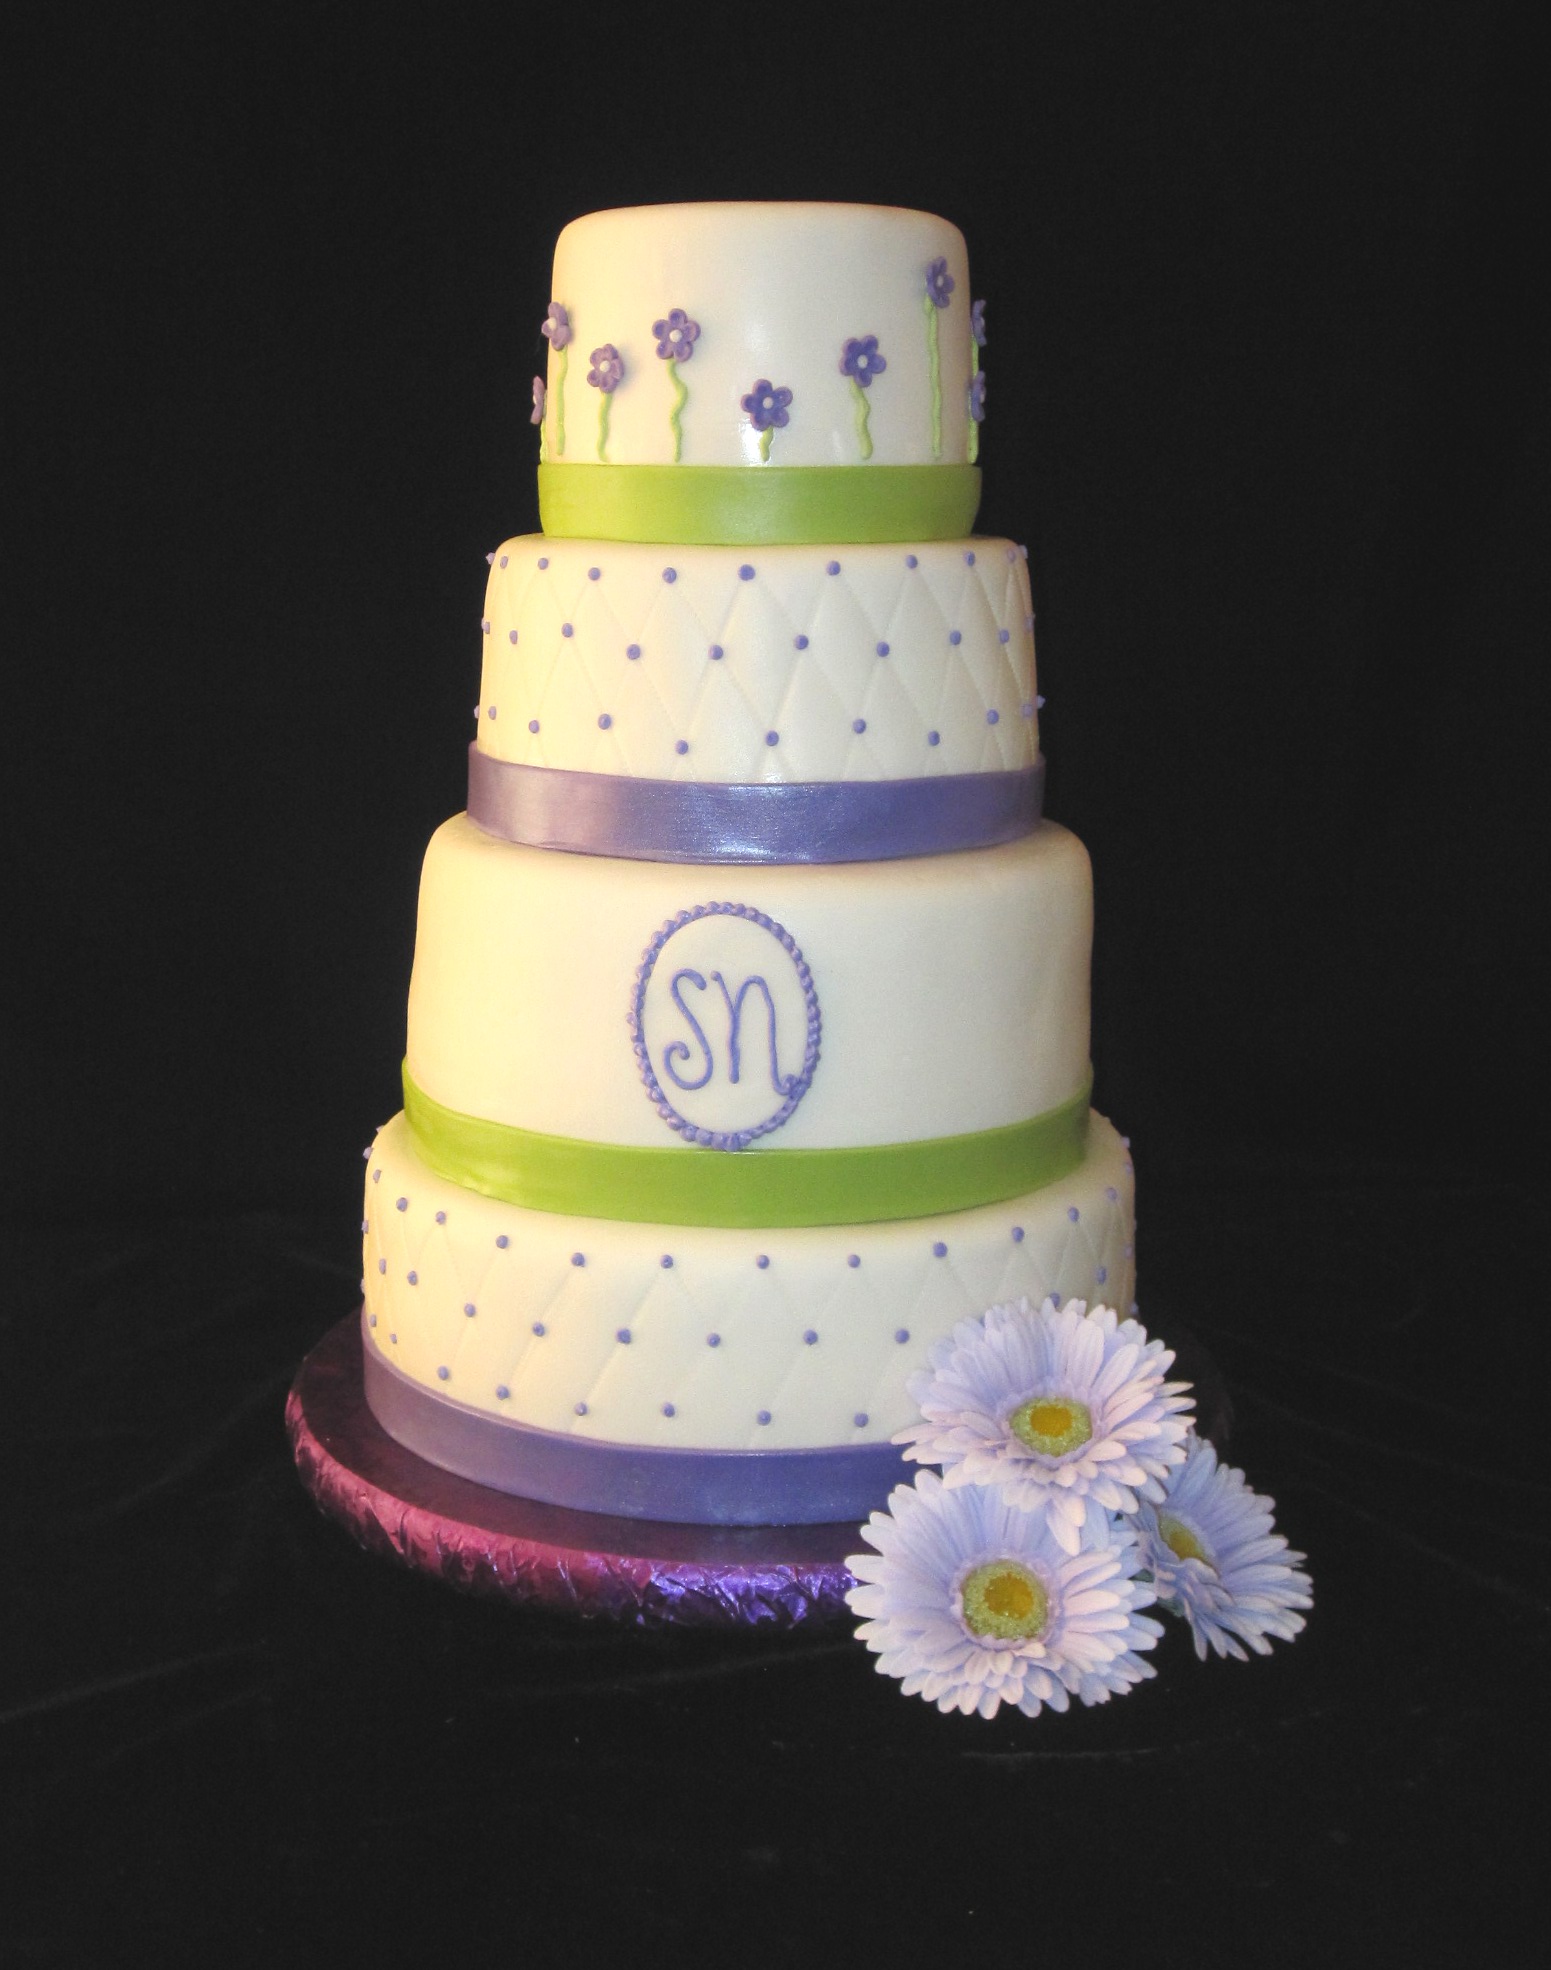 white fondant covered cake is decorated in purple and lime green ...